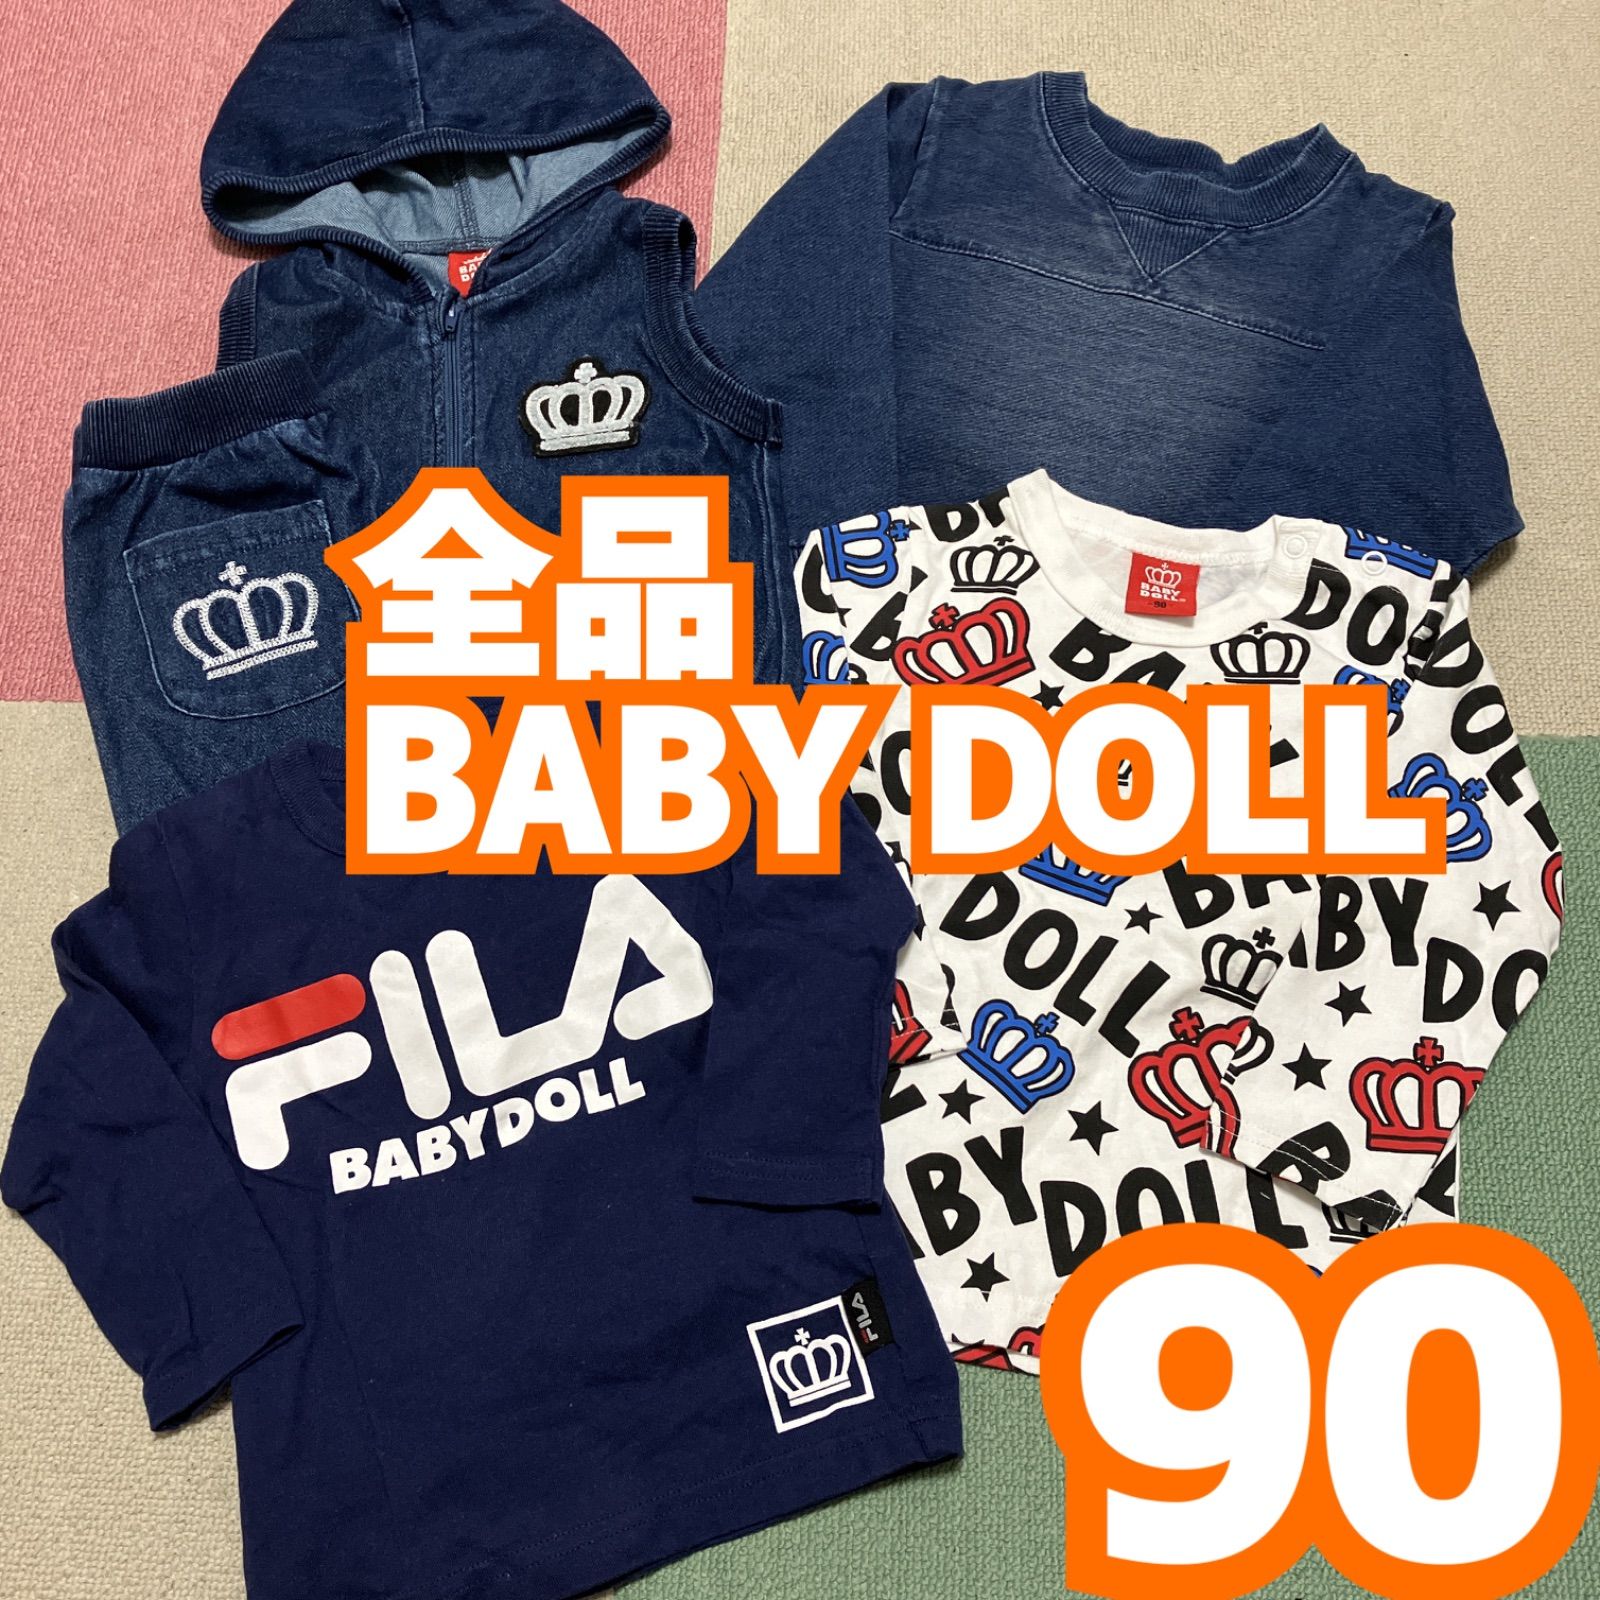 Tシャツ/カットソーBABY DOLL まとめ売り